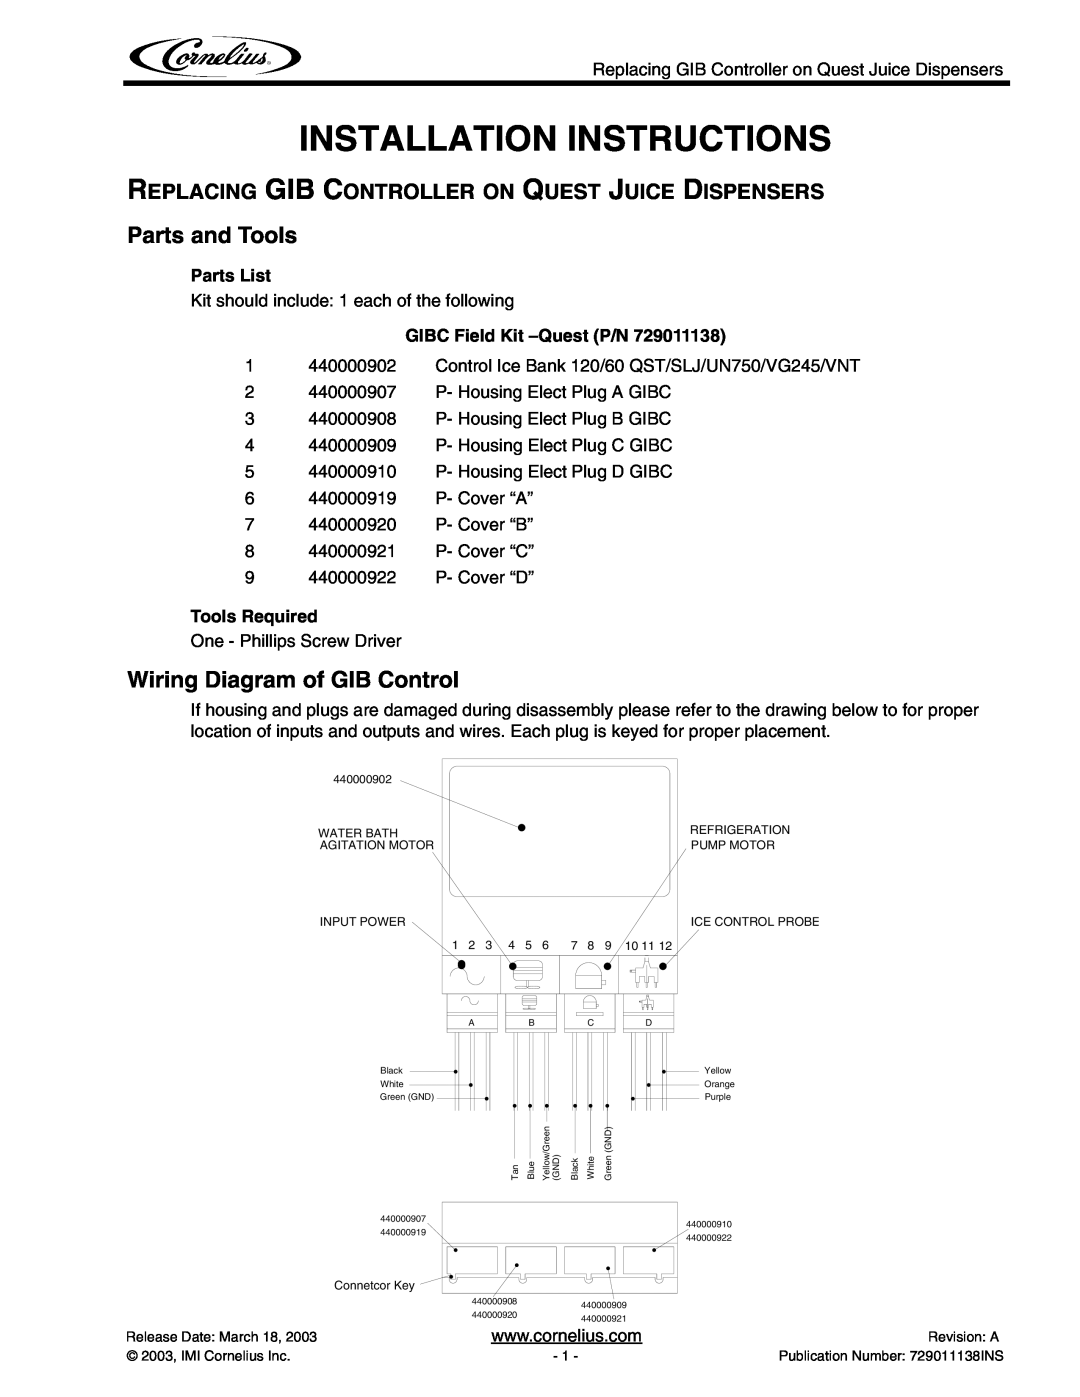 Cornelius 440000908 installation instructions Parts and Tools, Wiring Diagram of GIB Control, Installation Instructions 